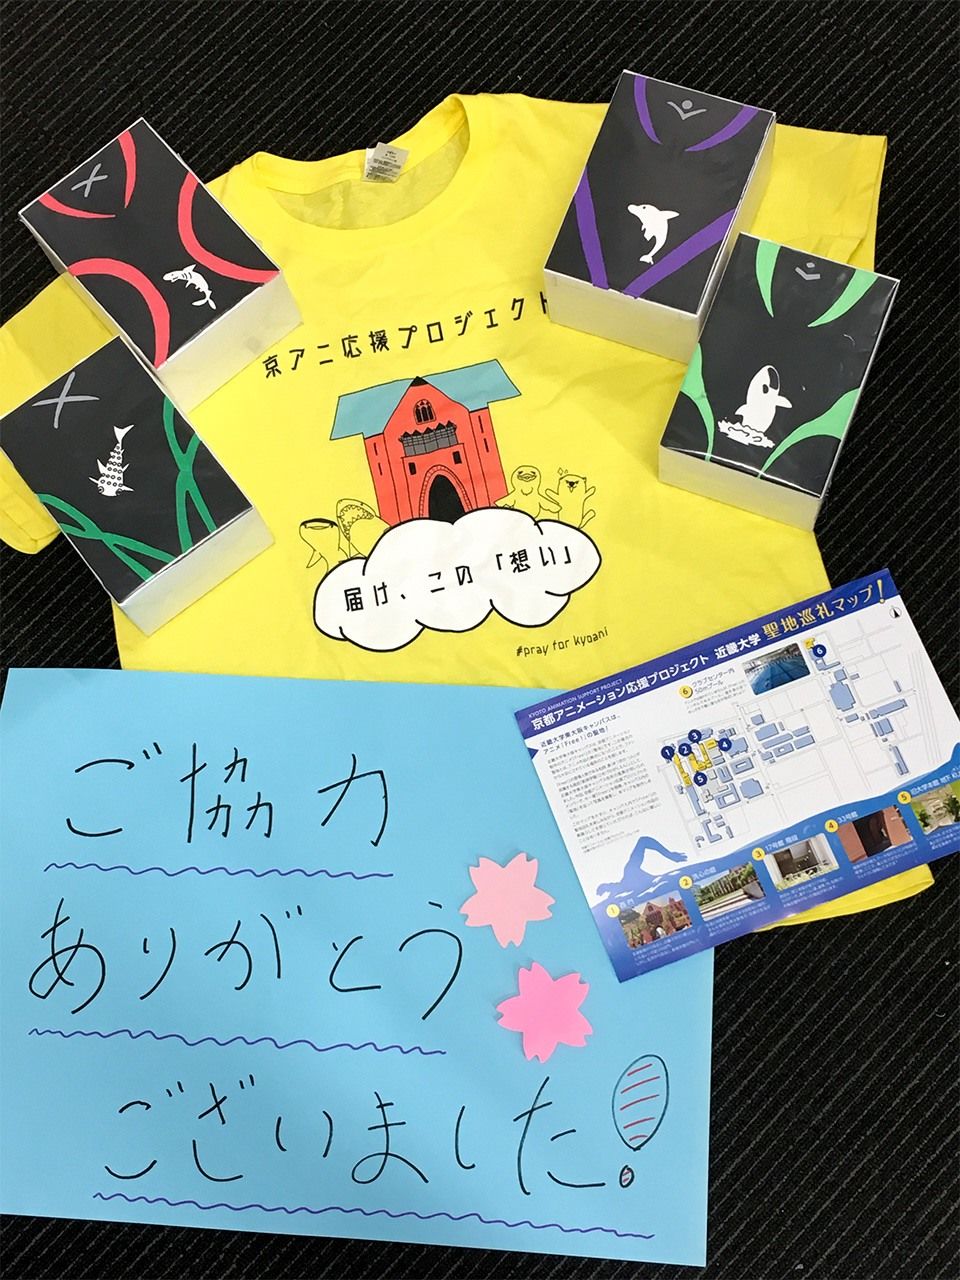 Volunteer T-shirt and other items used at the fundraising event at Kindai University. A “pilgrimage map” was handed out to people to donated money.   